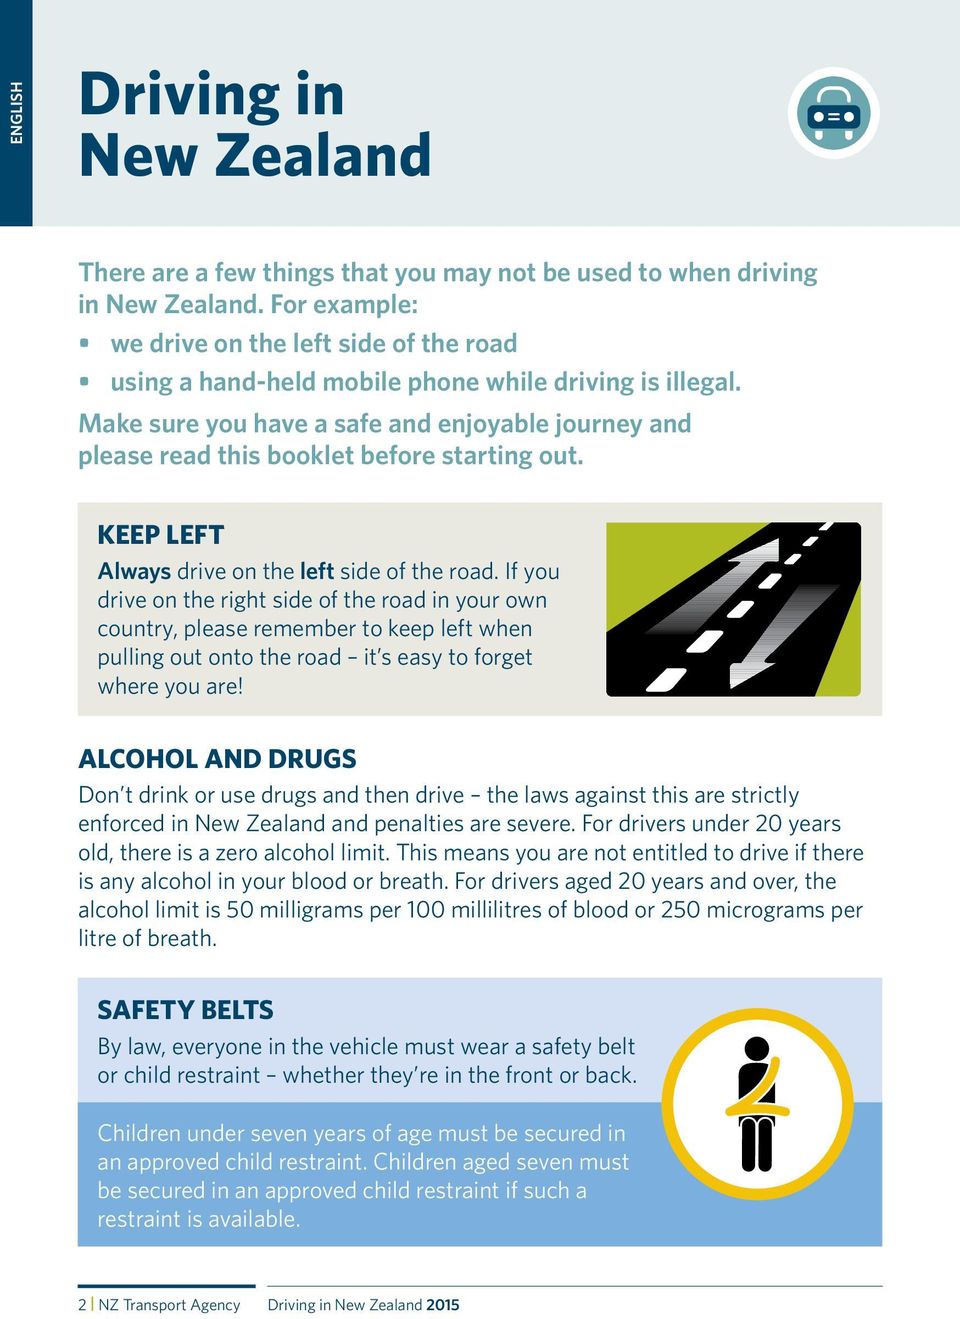 Make sure you have a safe and enjoyable journey and please read this booklet before starting out. KEEP LEFT Always drive on the left side of the road.